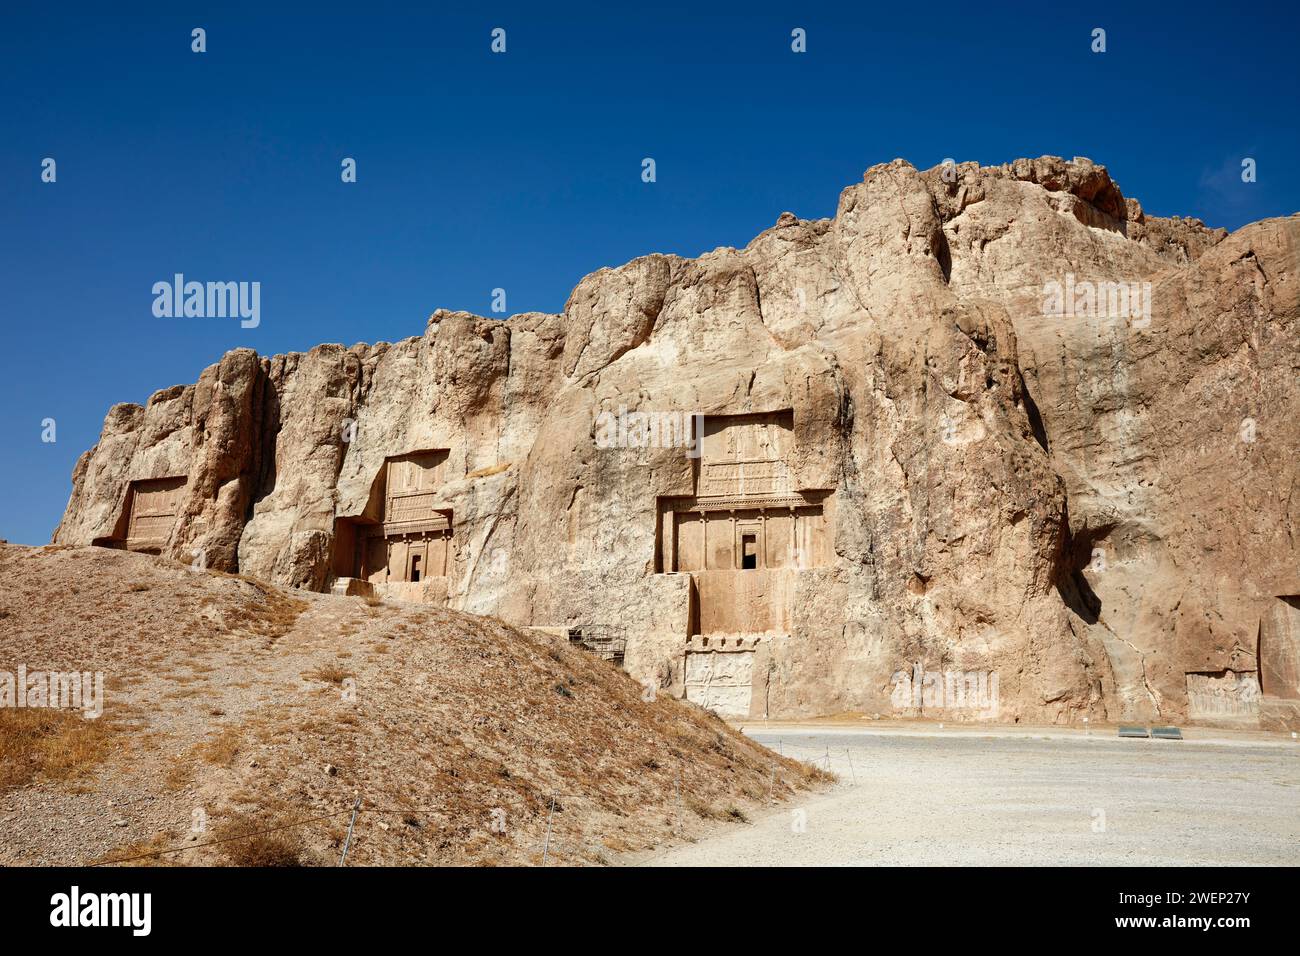 View of the Naqsh-e Rostam Necropolis, low rocky hill (aka Hossein mountain) with rock-cut tombs of kings of Achaemenian dynasty near Persepolis, Iran Stock Photo